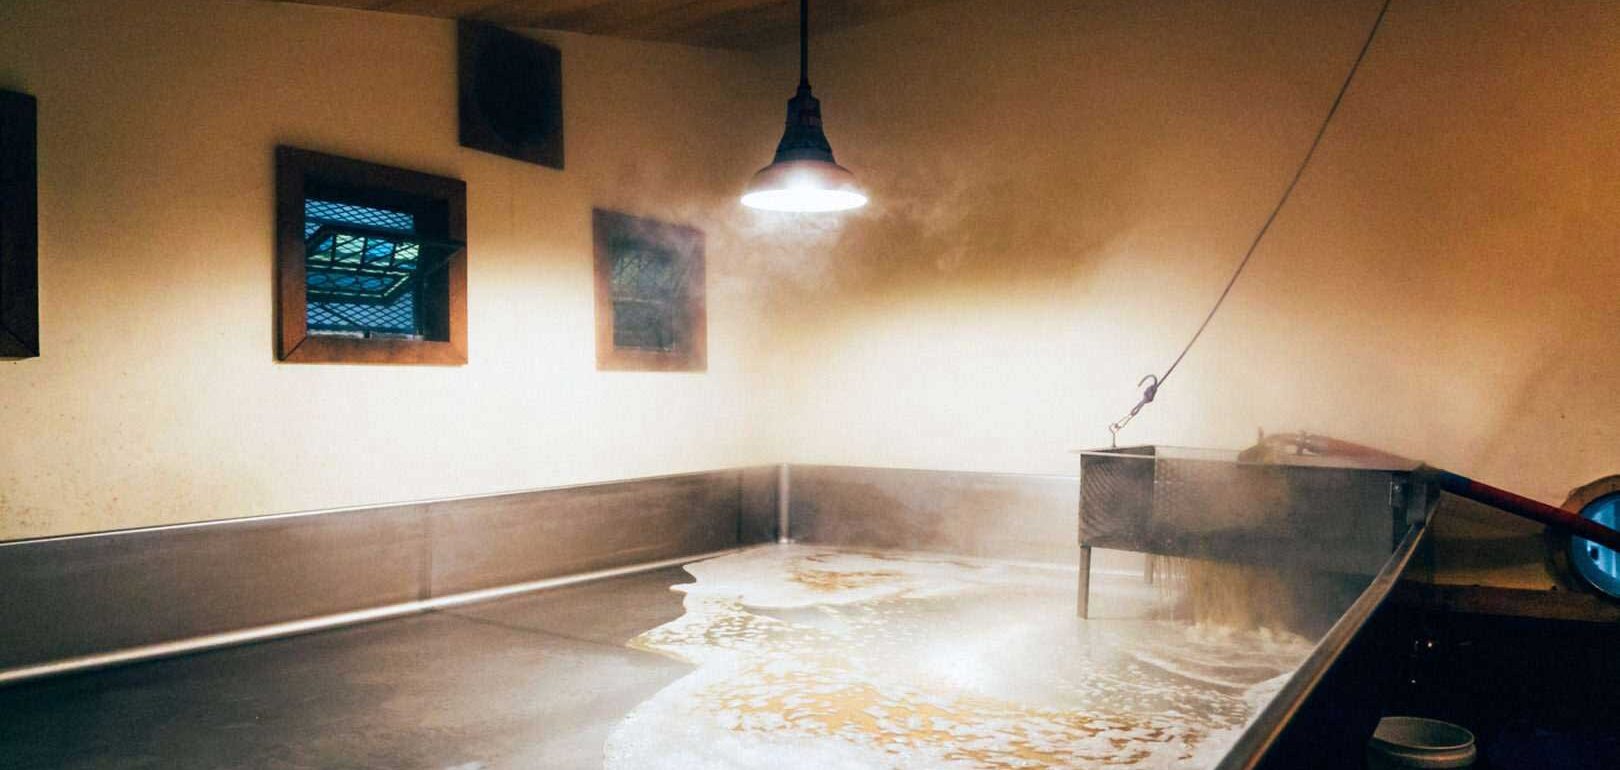 Spontaneously fermented beer is brewed at Allagash Brewing Company